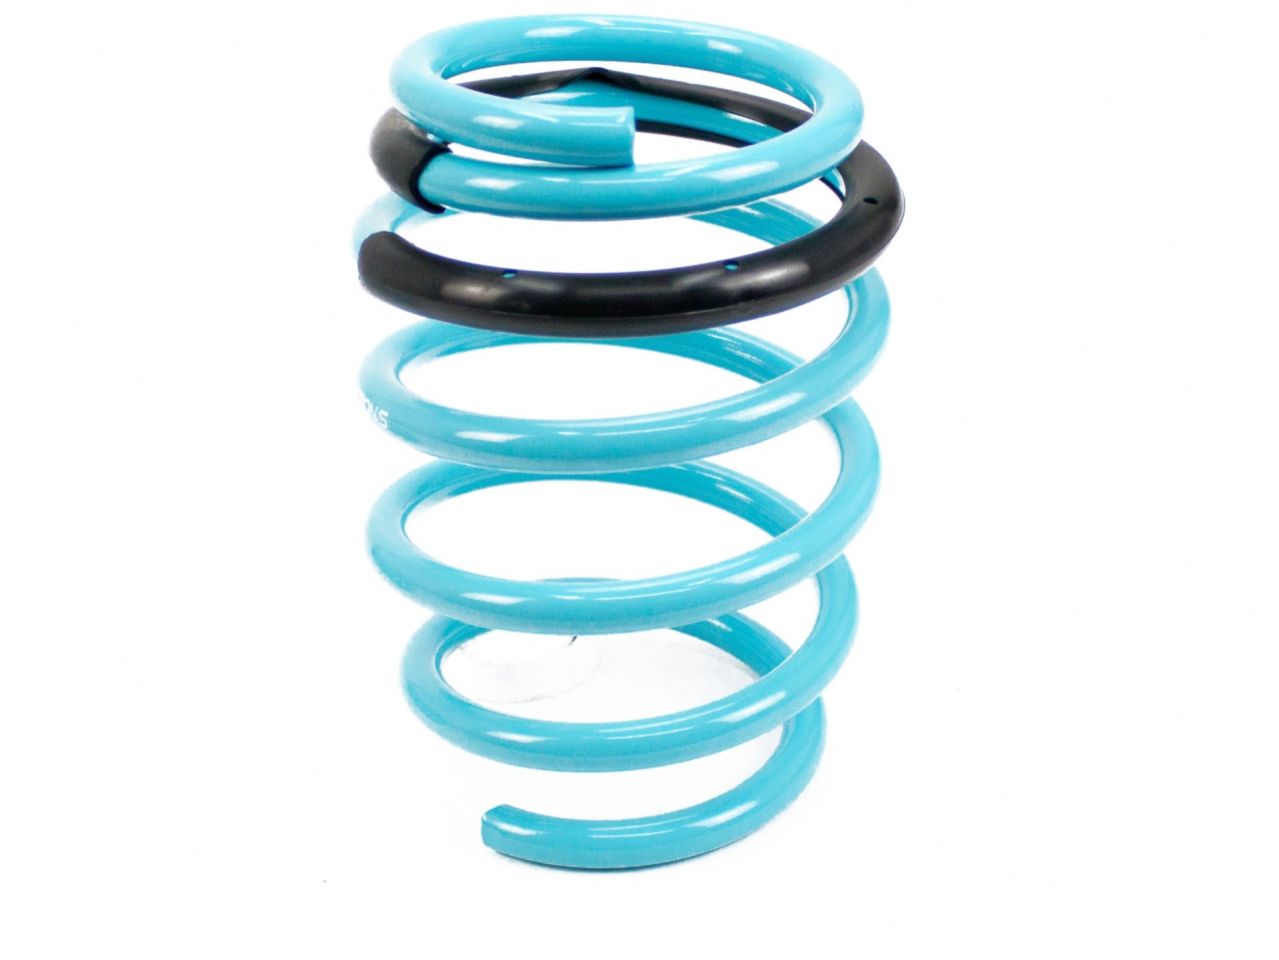 Godspeed Nissan Sentra 2007-12 Traction-s Performance Lowering Springs